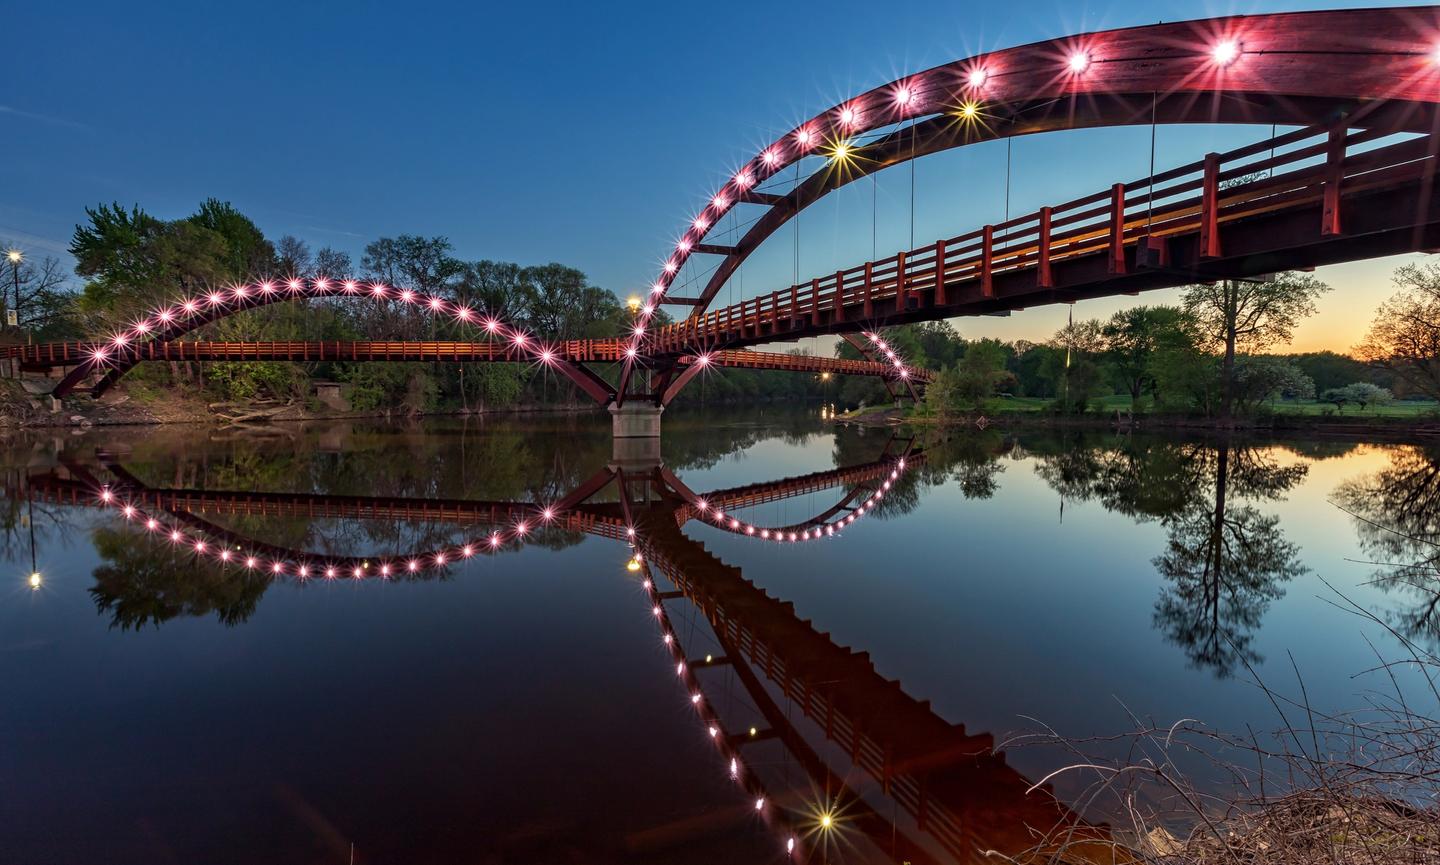 The Tridge at night, spans the confluence of the Chippewa and Tittabawassee Rivers in Chippewassee Park in Midland, Michigan